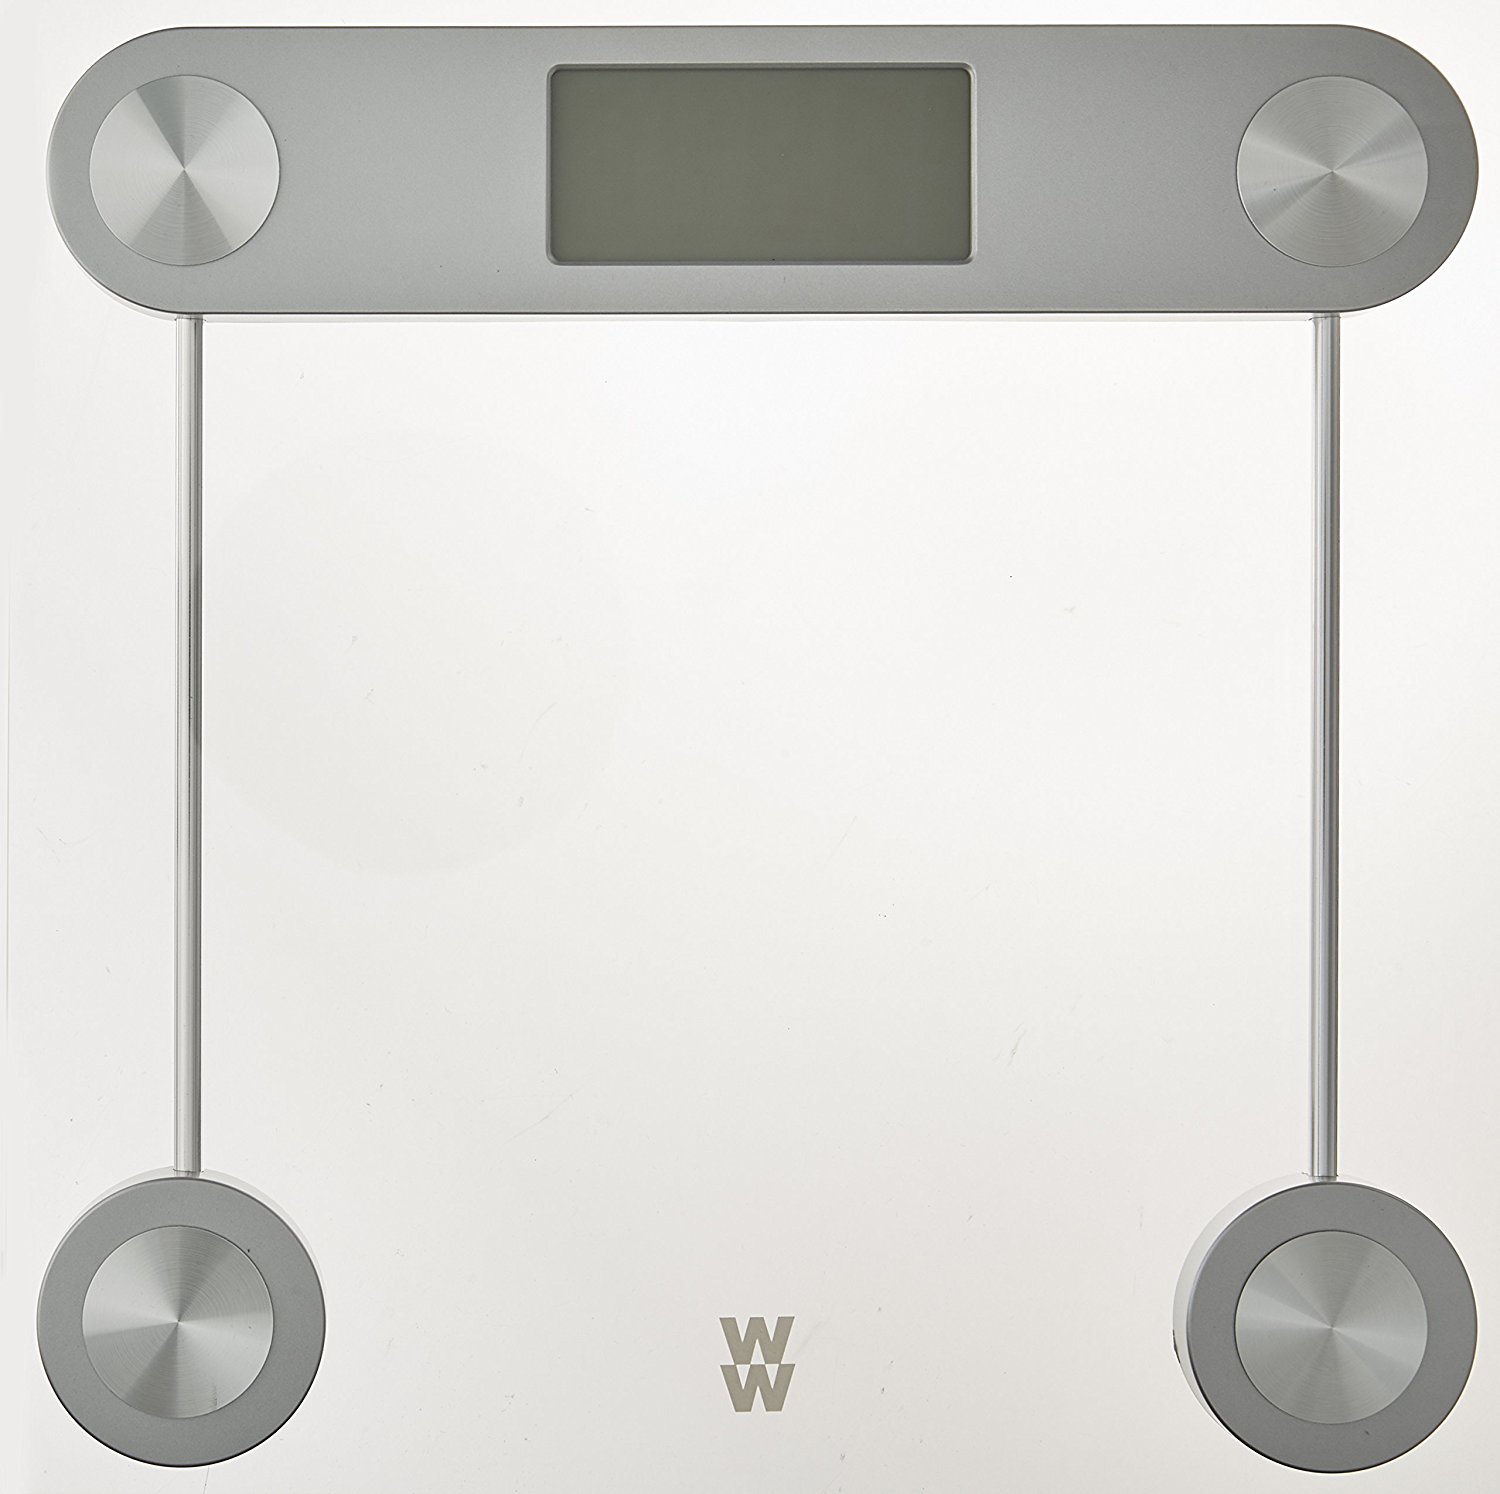 Weight Watchers by Conair Digital Glass Bathroom Scale Only $11.39!